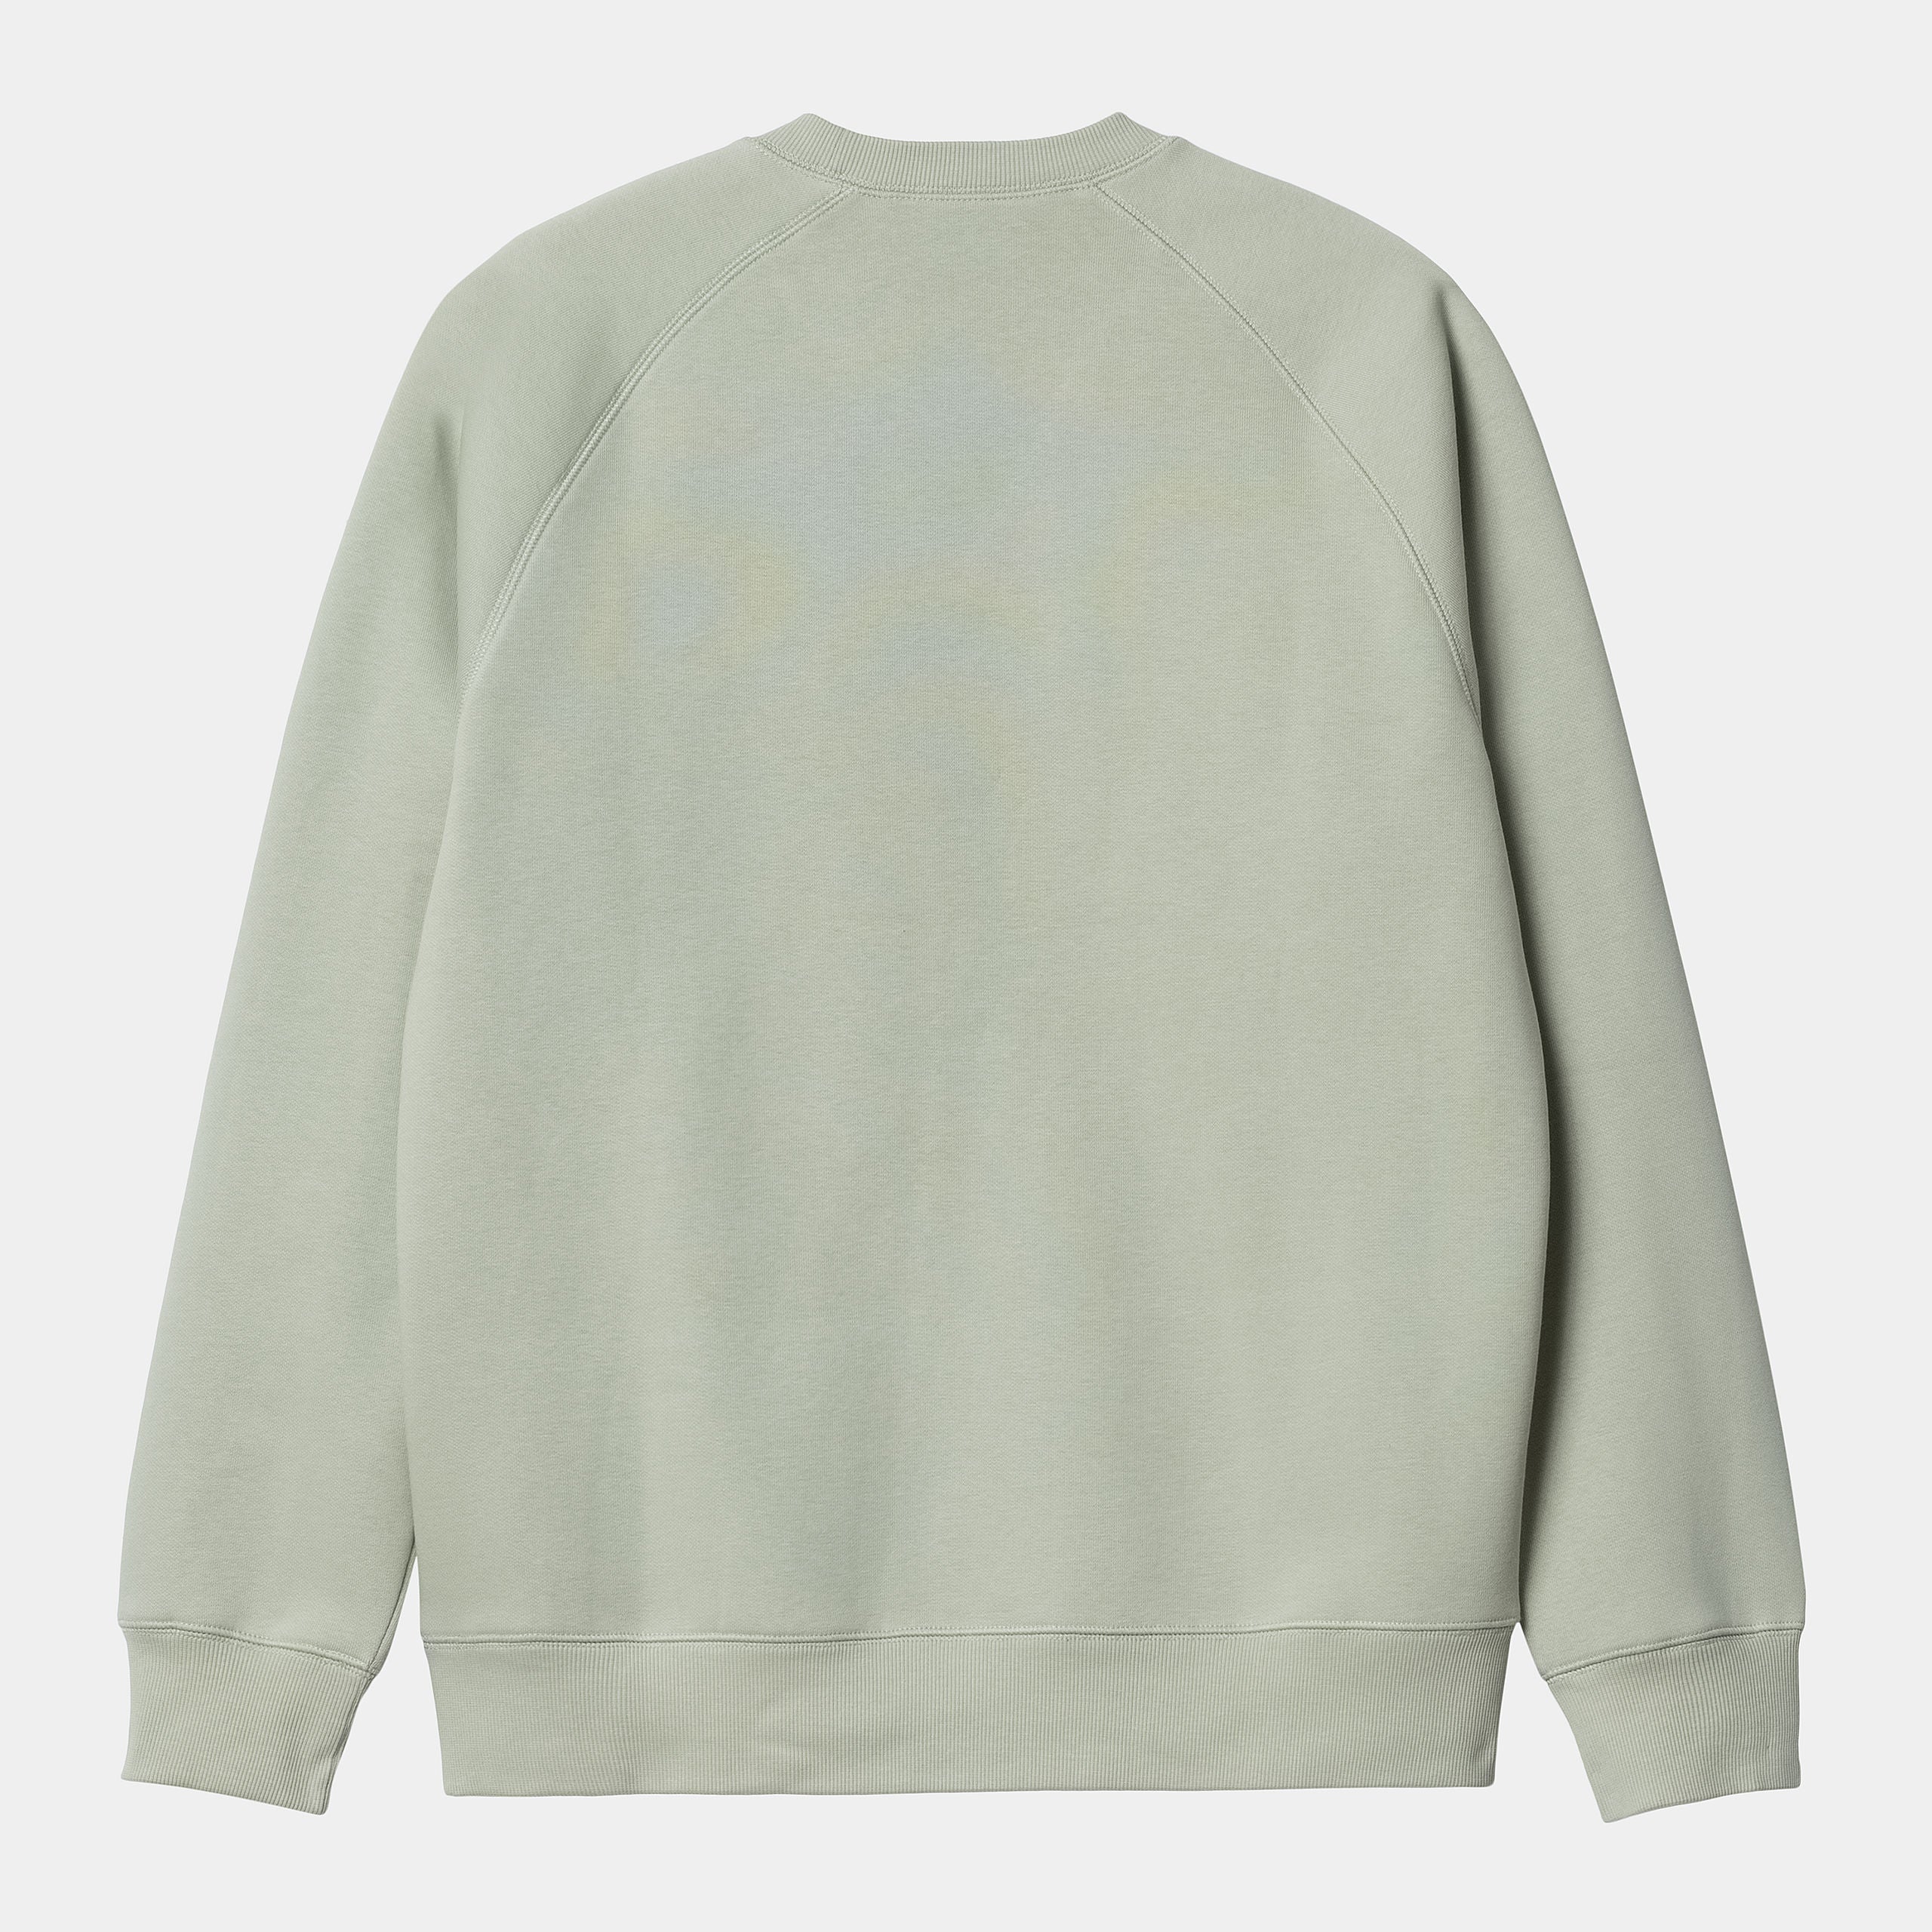 Carhartt WIP Mens Chase Sweat Top - Agave